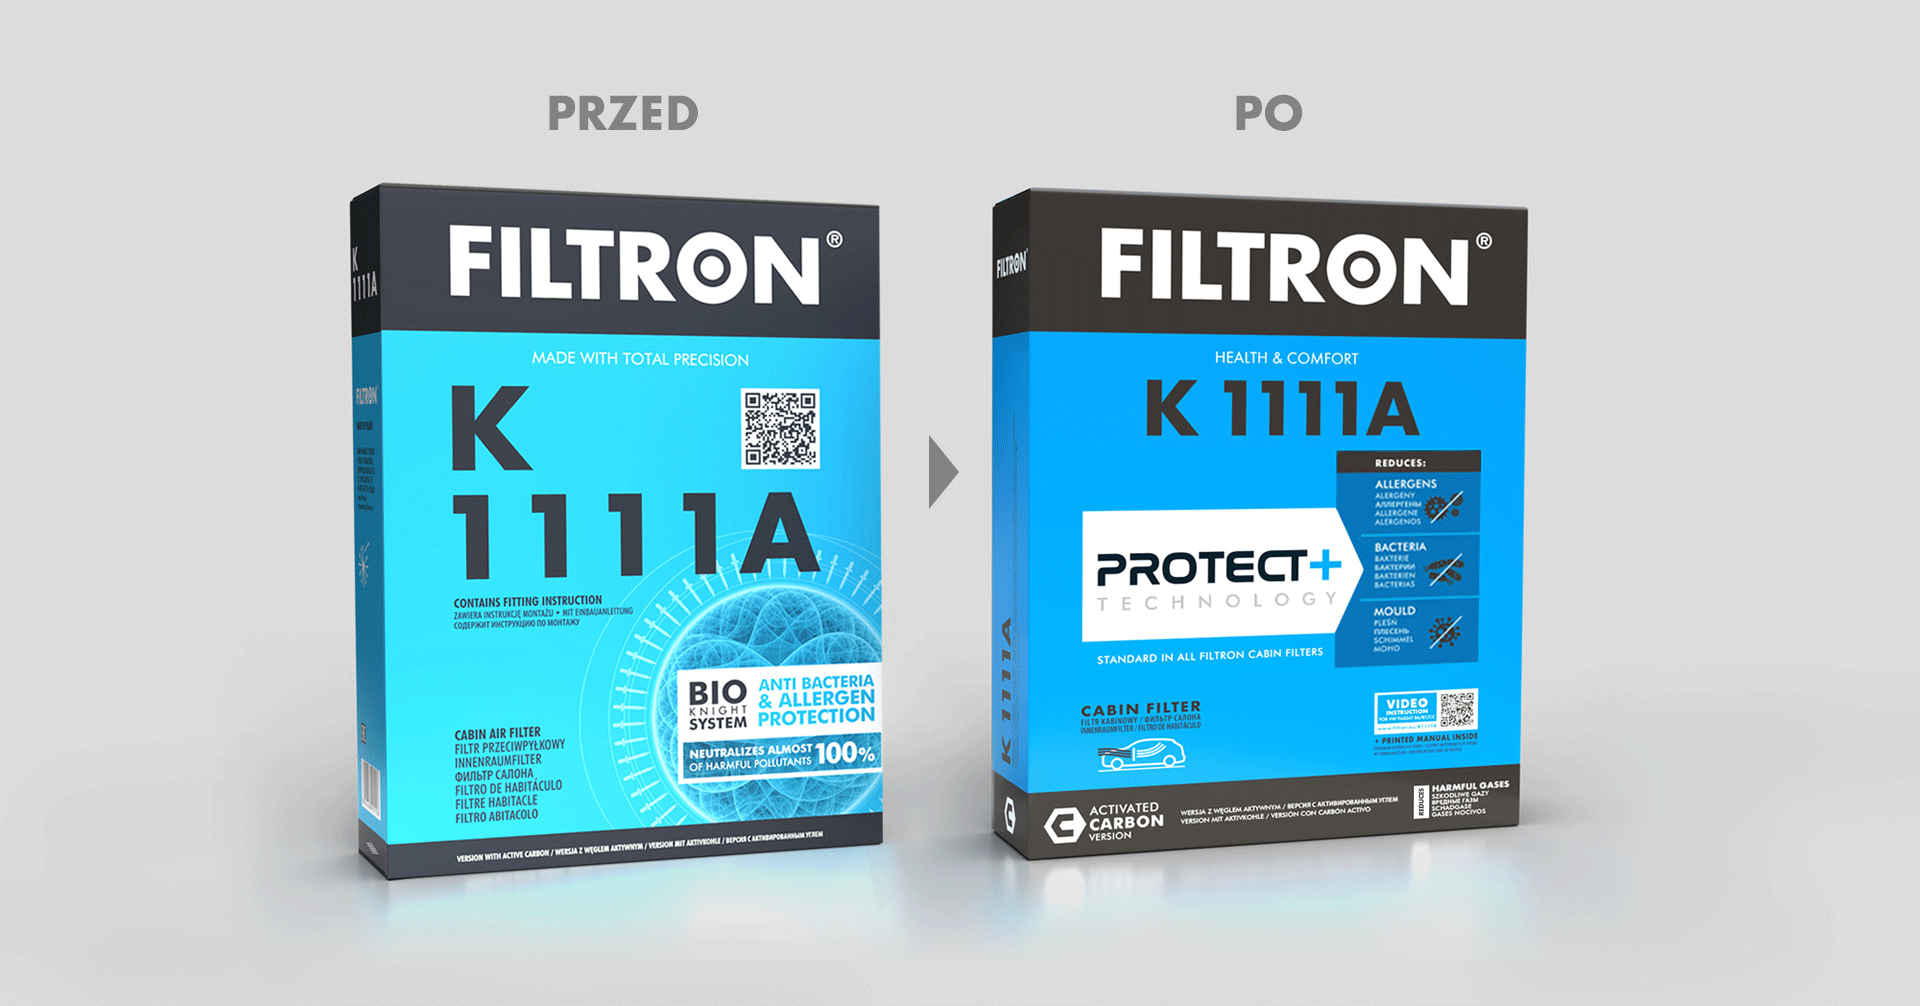 Filtron redesign - comparison of packaging design before and after.